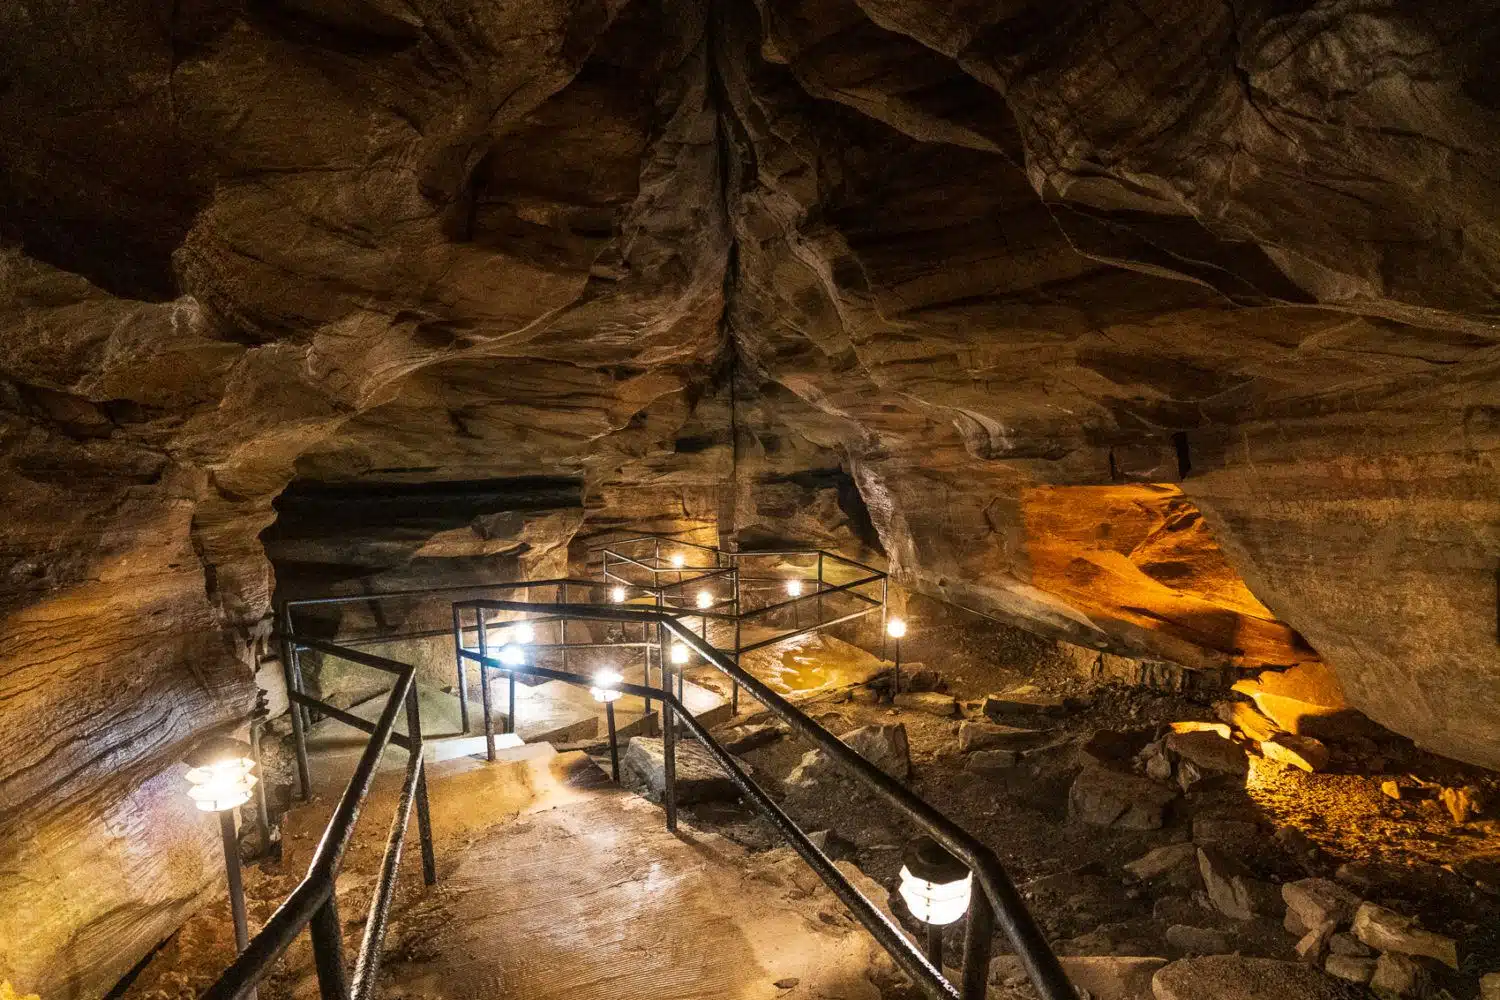 The pathway through the caverns, lit by lights.